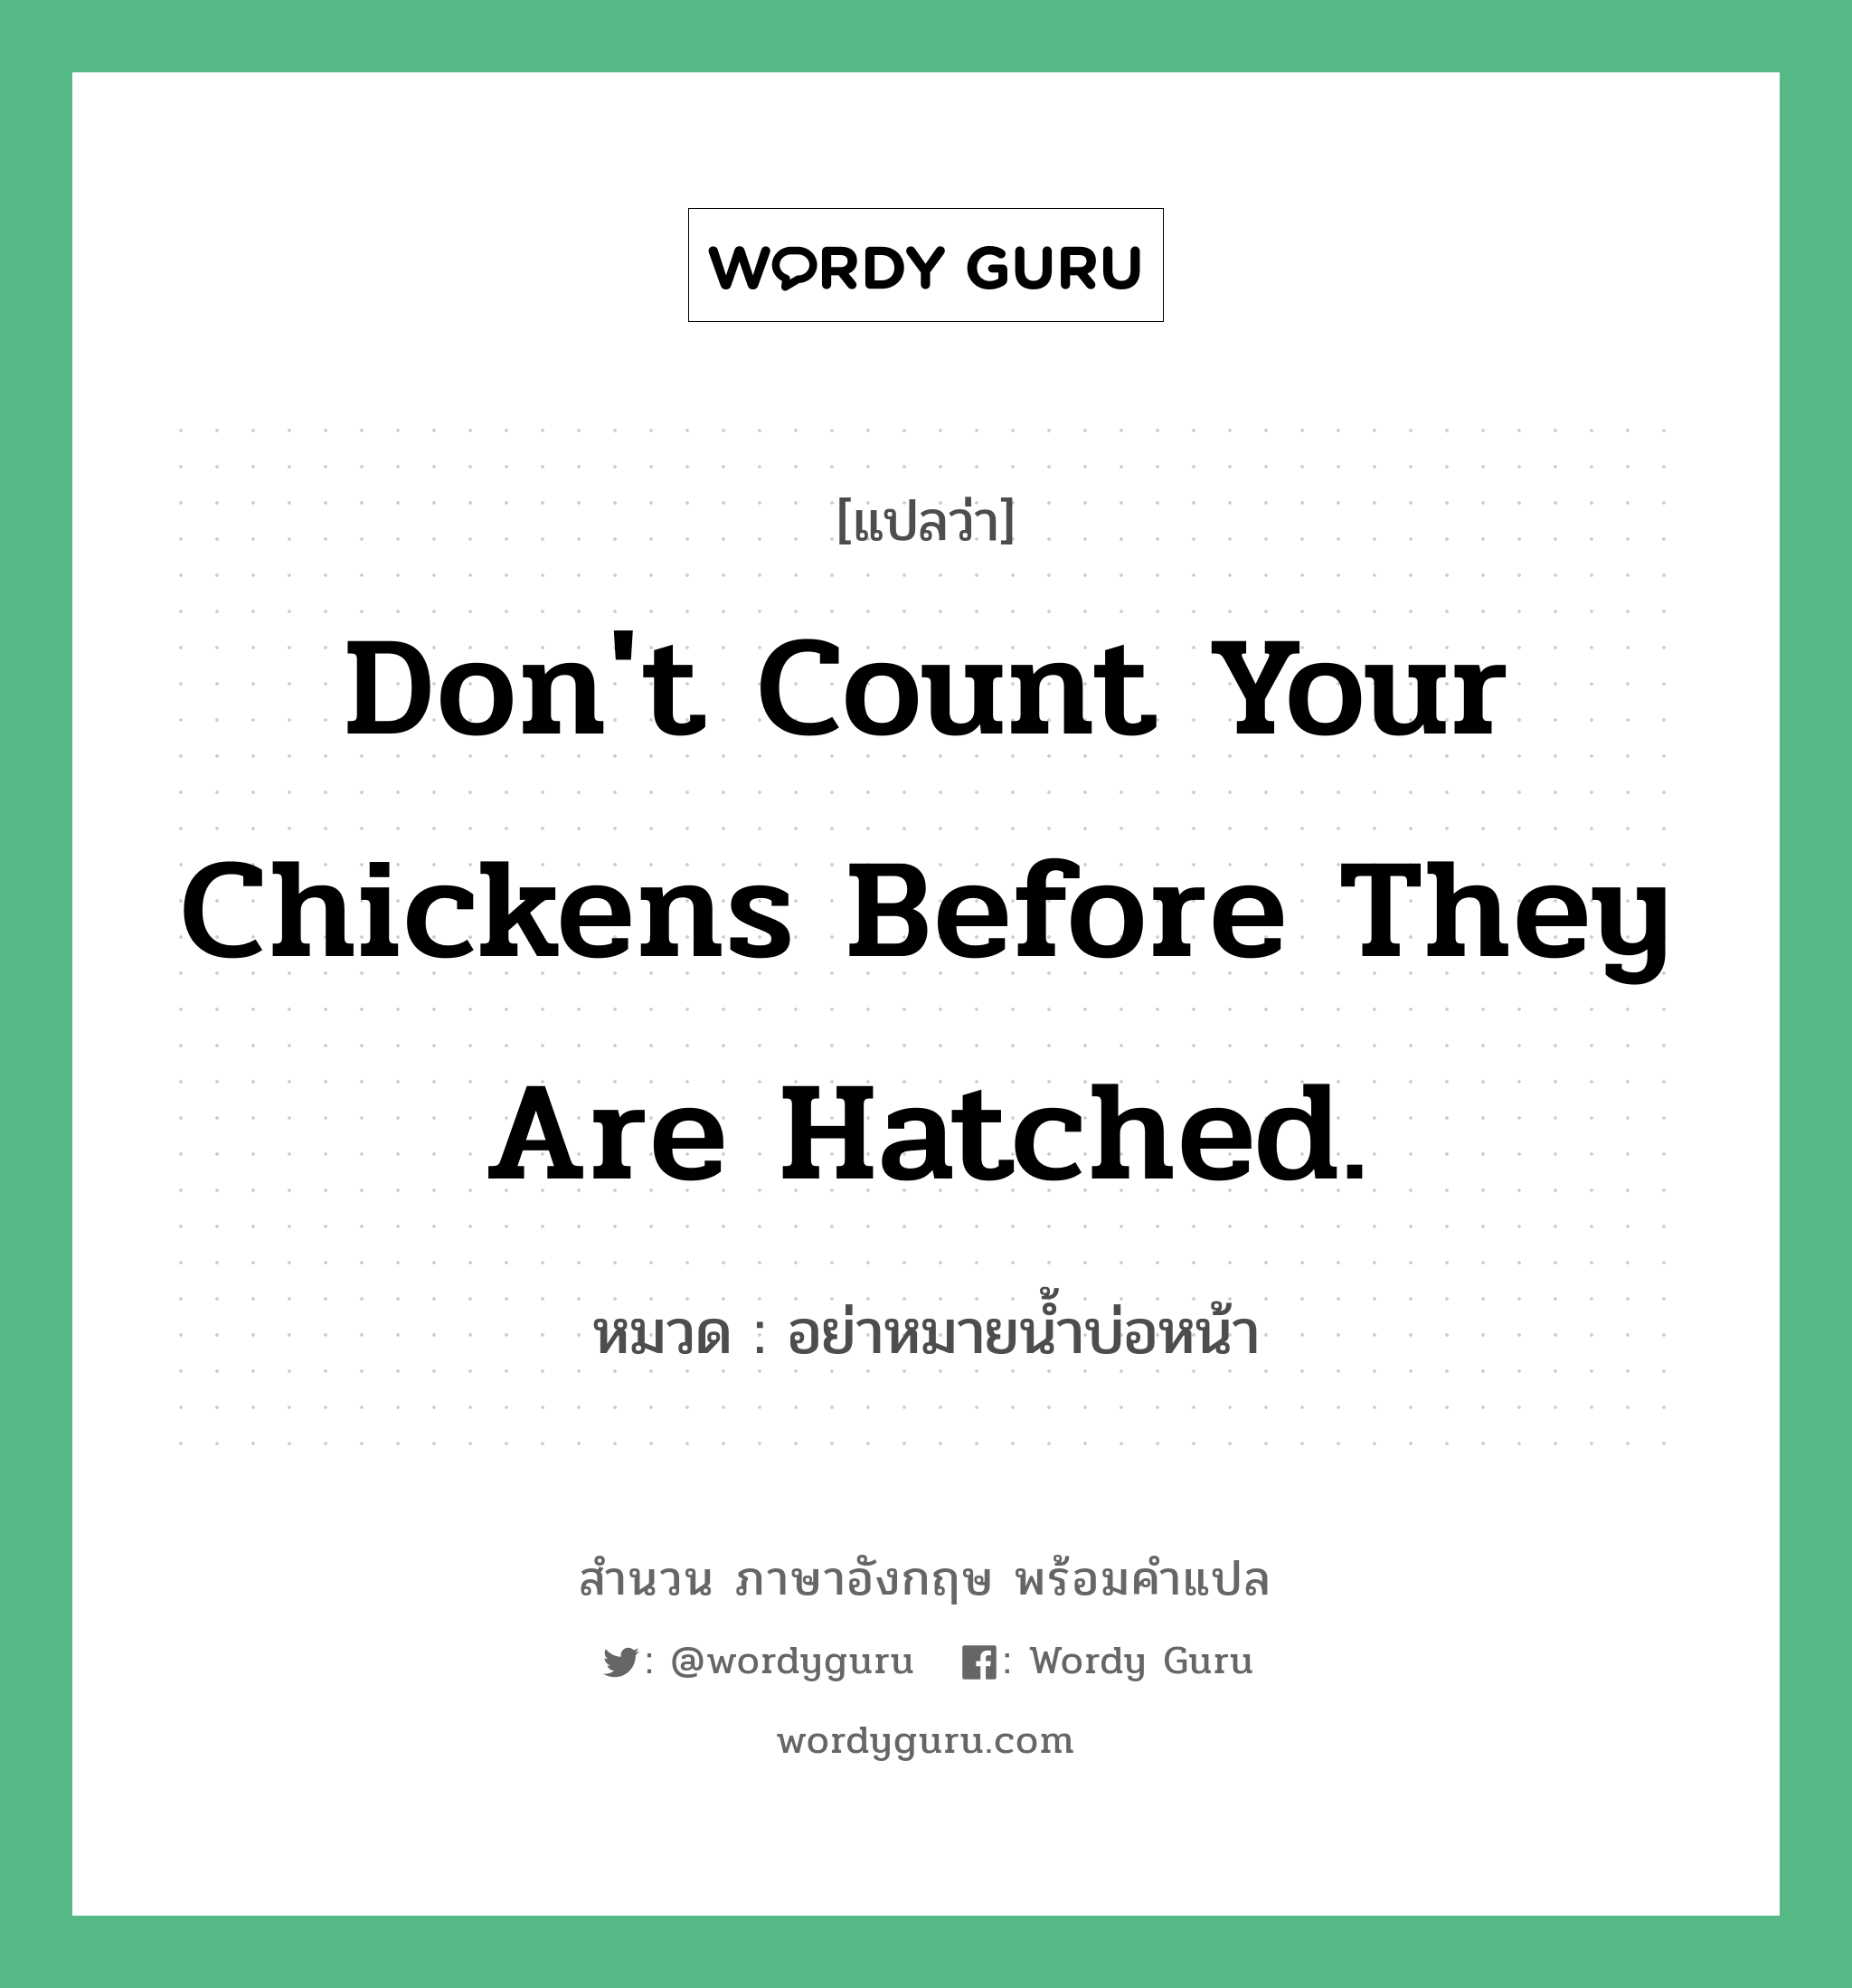 Don't count your chickens before they are hatched. แปลว่า?, สำนวนภาษาอังกฤษ Don't count your chickens before they are hatched. หมวด อย่าหมายน้ำบ่อหน้า คำสุภาษิต ภาษาอังกฤษ หมวด คำสุภาษิต ภาษาอังกฤษ